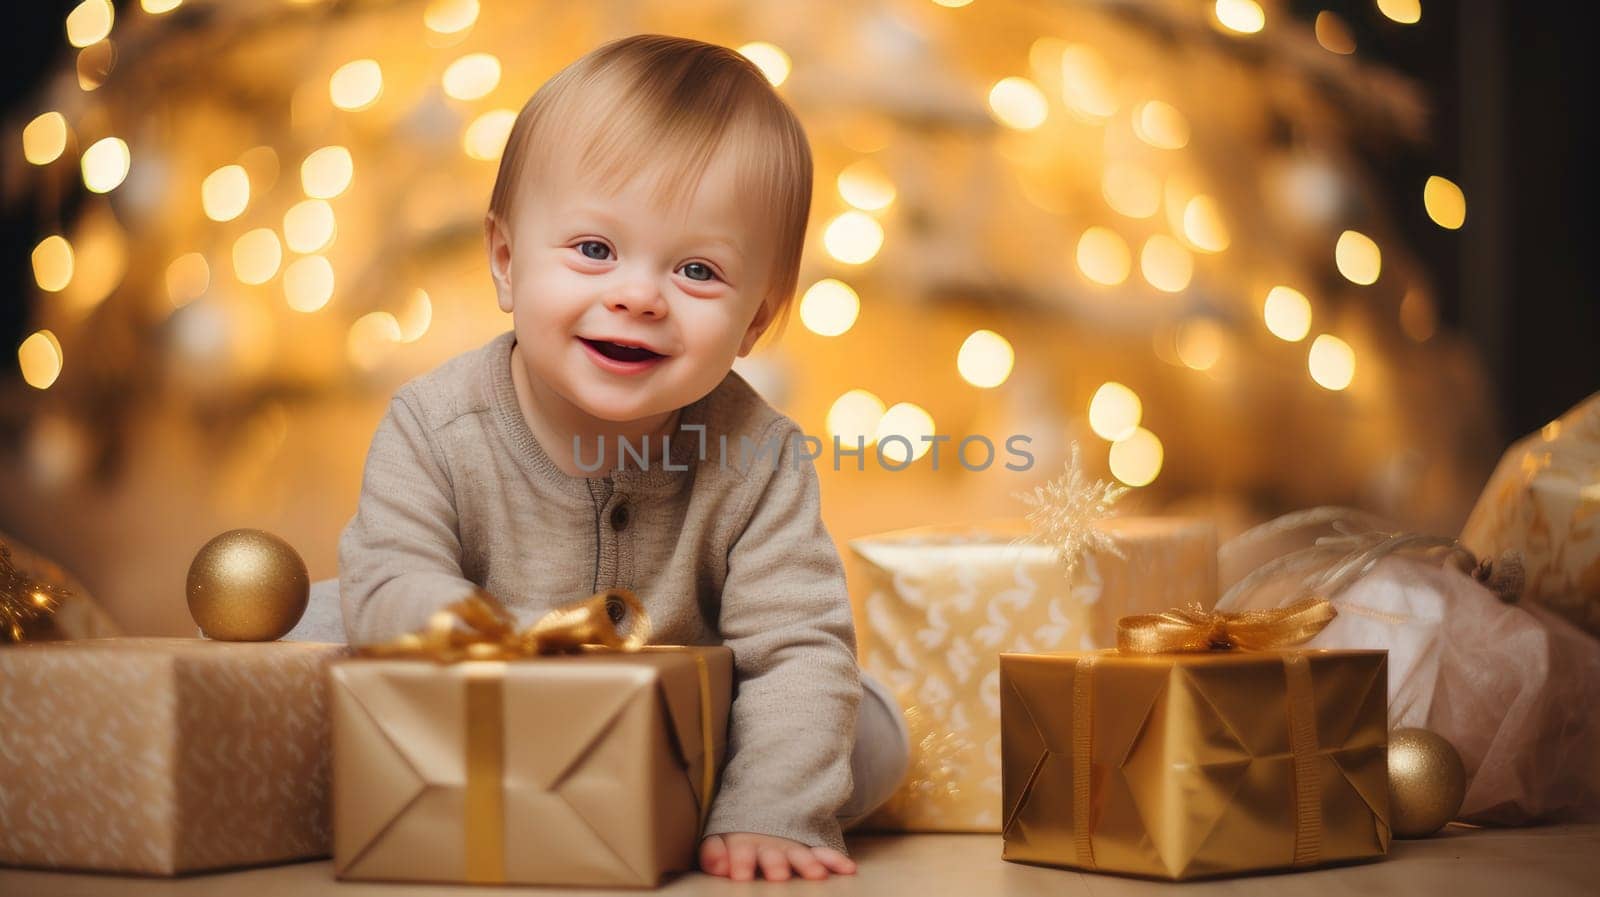 Happy little one with a child with Down syndrome with gifts and lights on the background of a New Year's tree, people with disabilities. Merry Christmas and Merry New Year concept